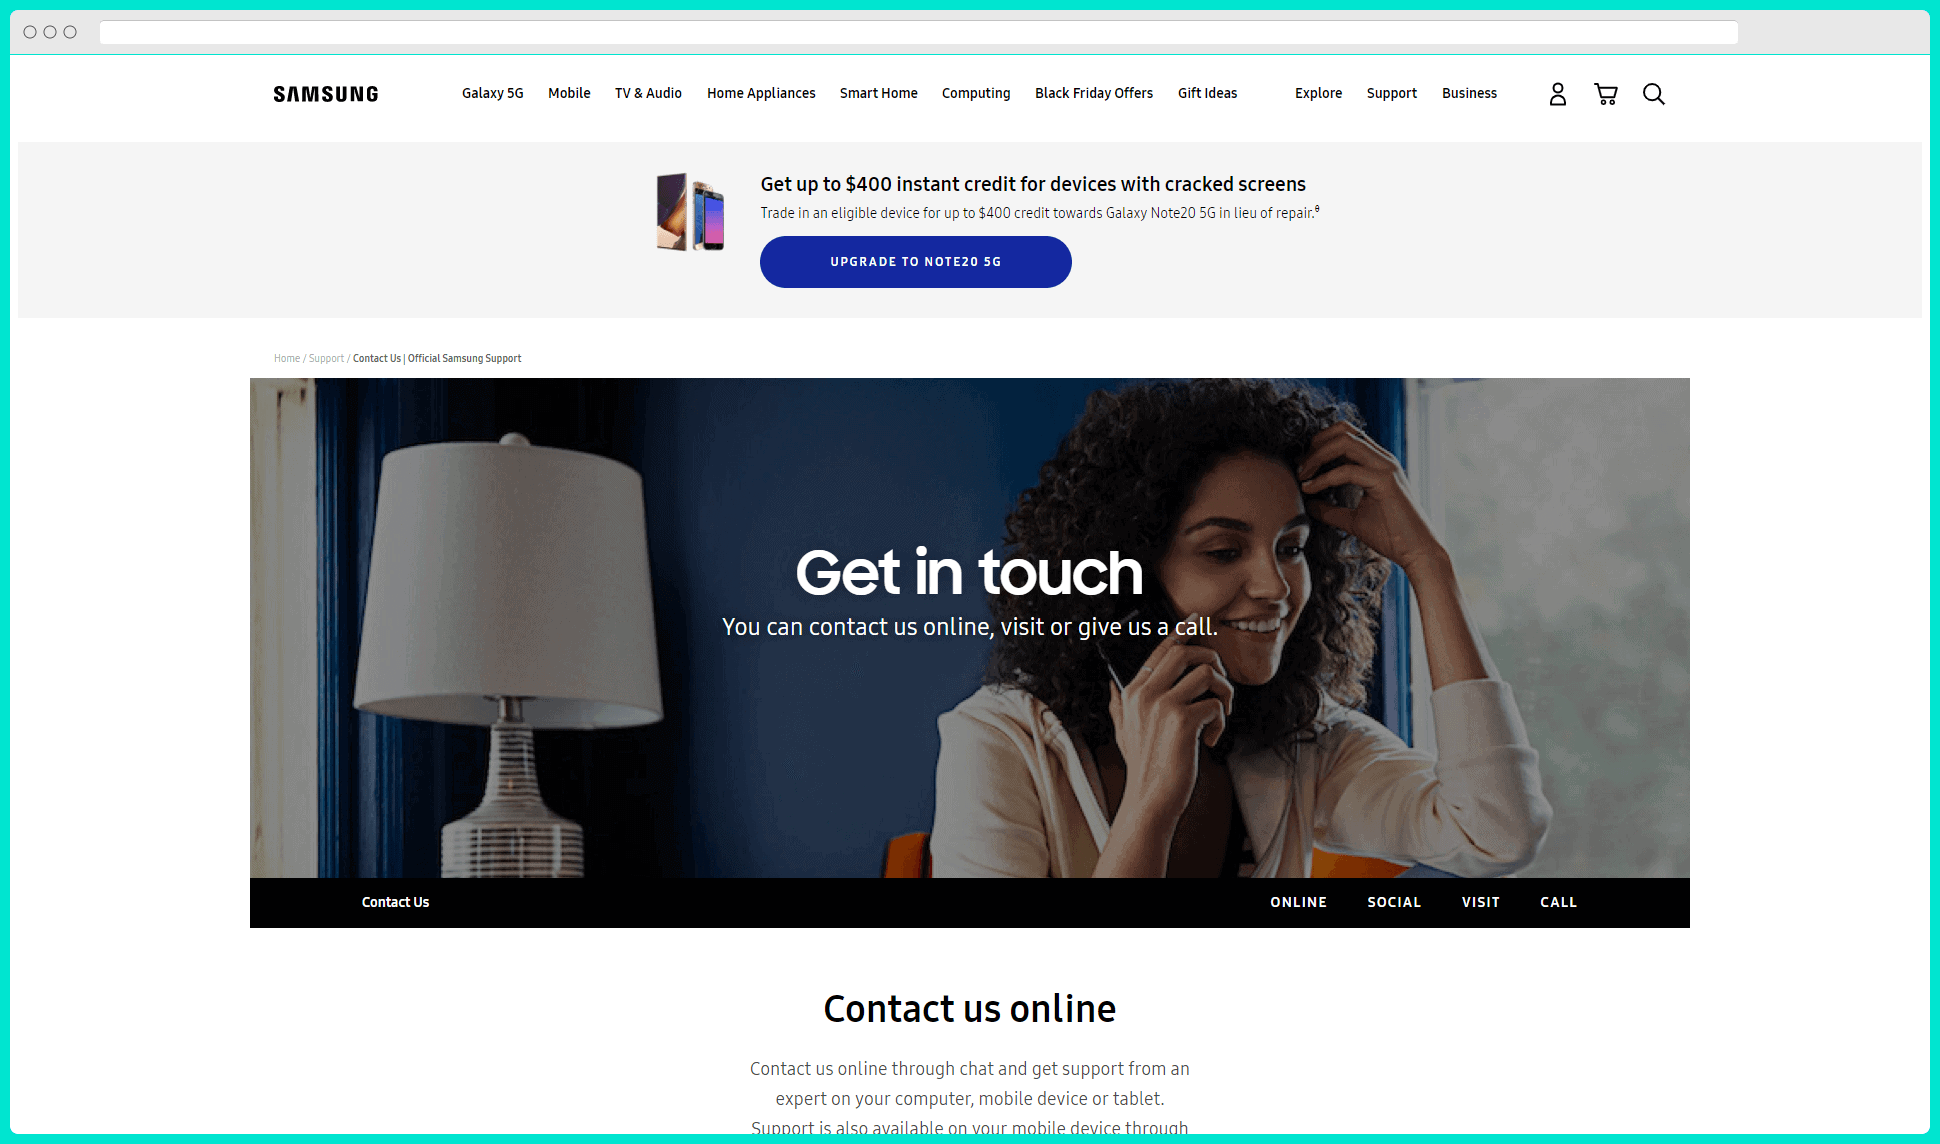 samsung contact page seo example above the fold